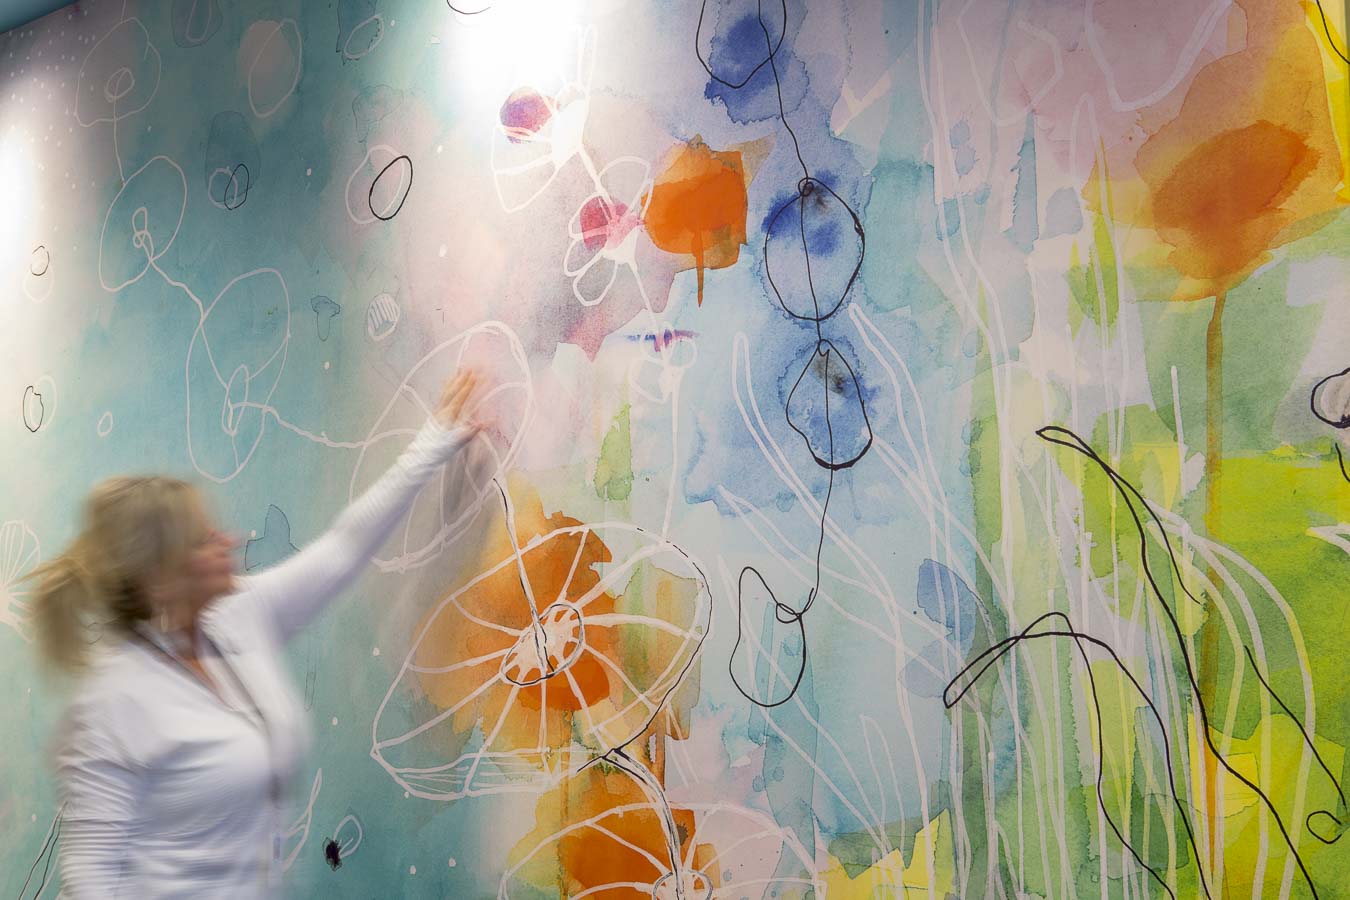 How Art Can Improve the Healthcare Environment in Australia